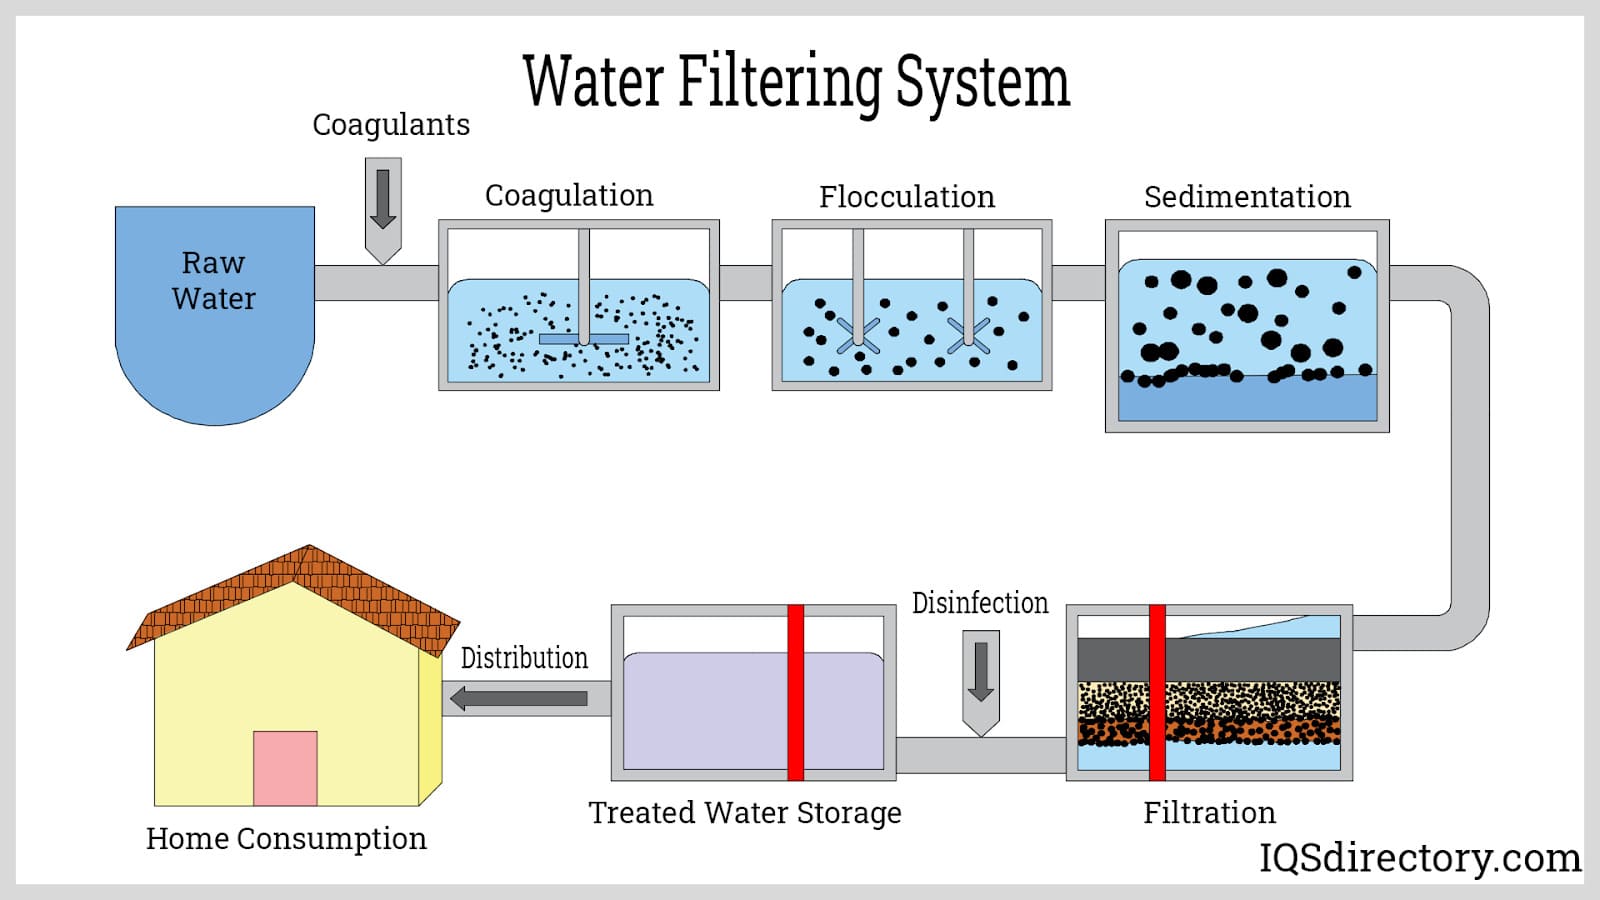 Water Filtering Systems: Types, Applications, Advantages, and Components